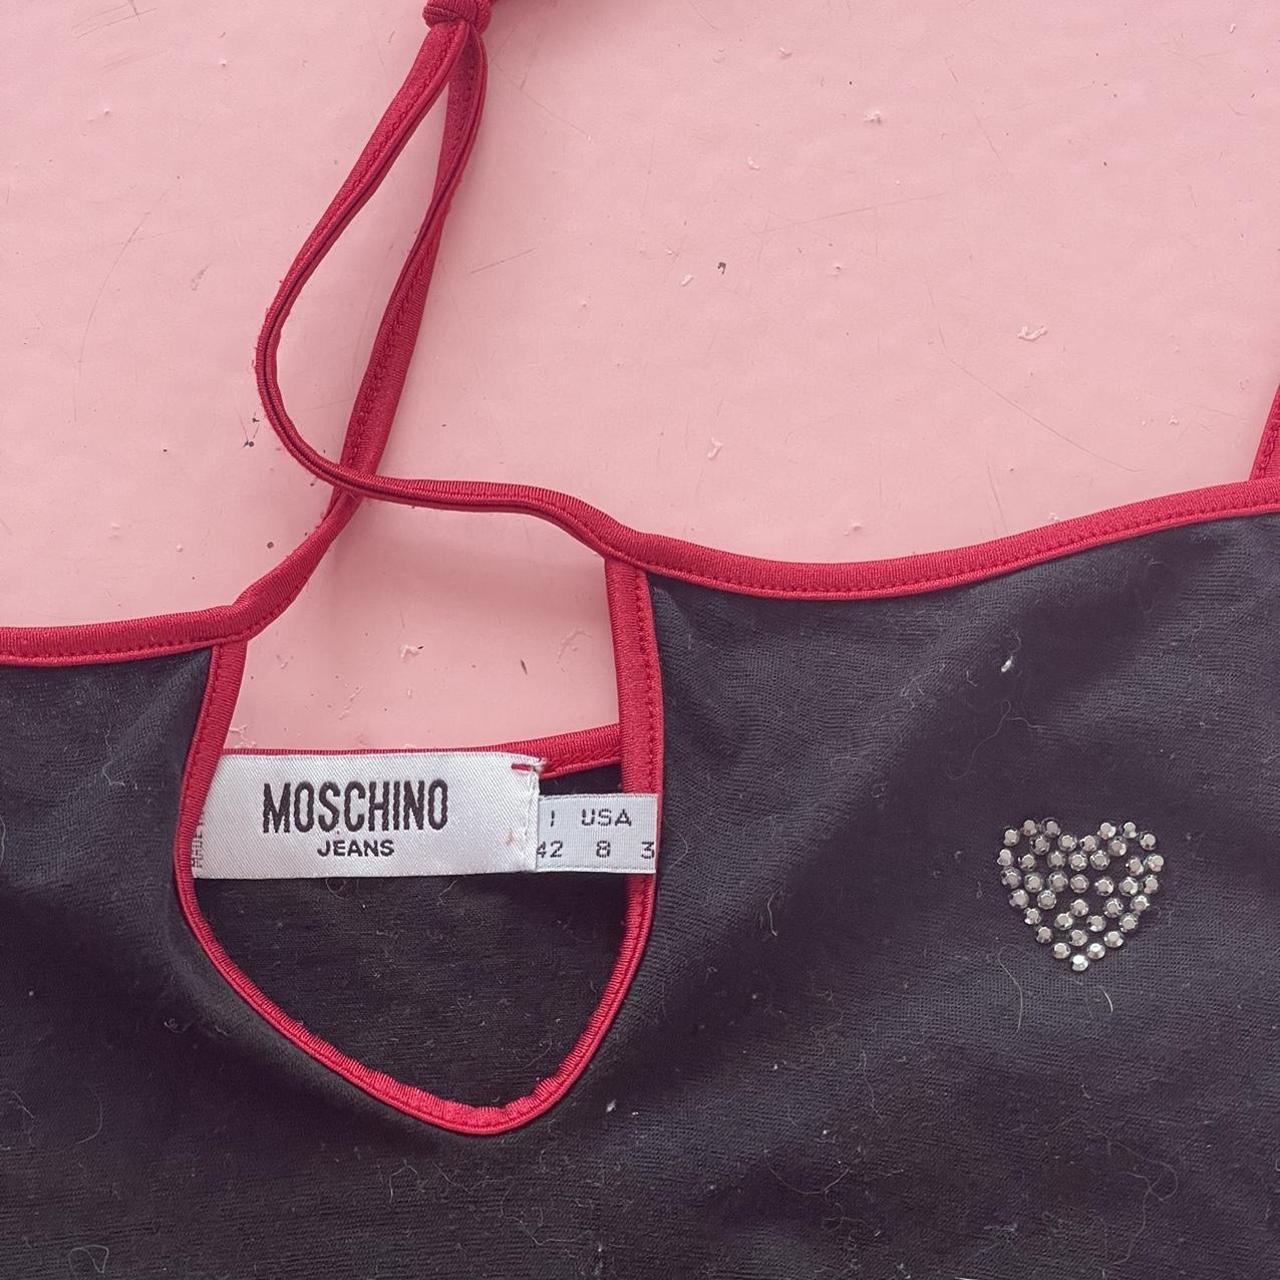 Moschino Women's Red and Black Vest | Depop